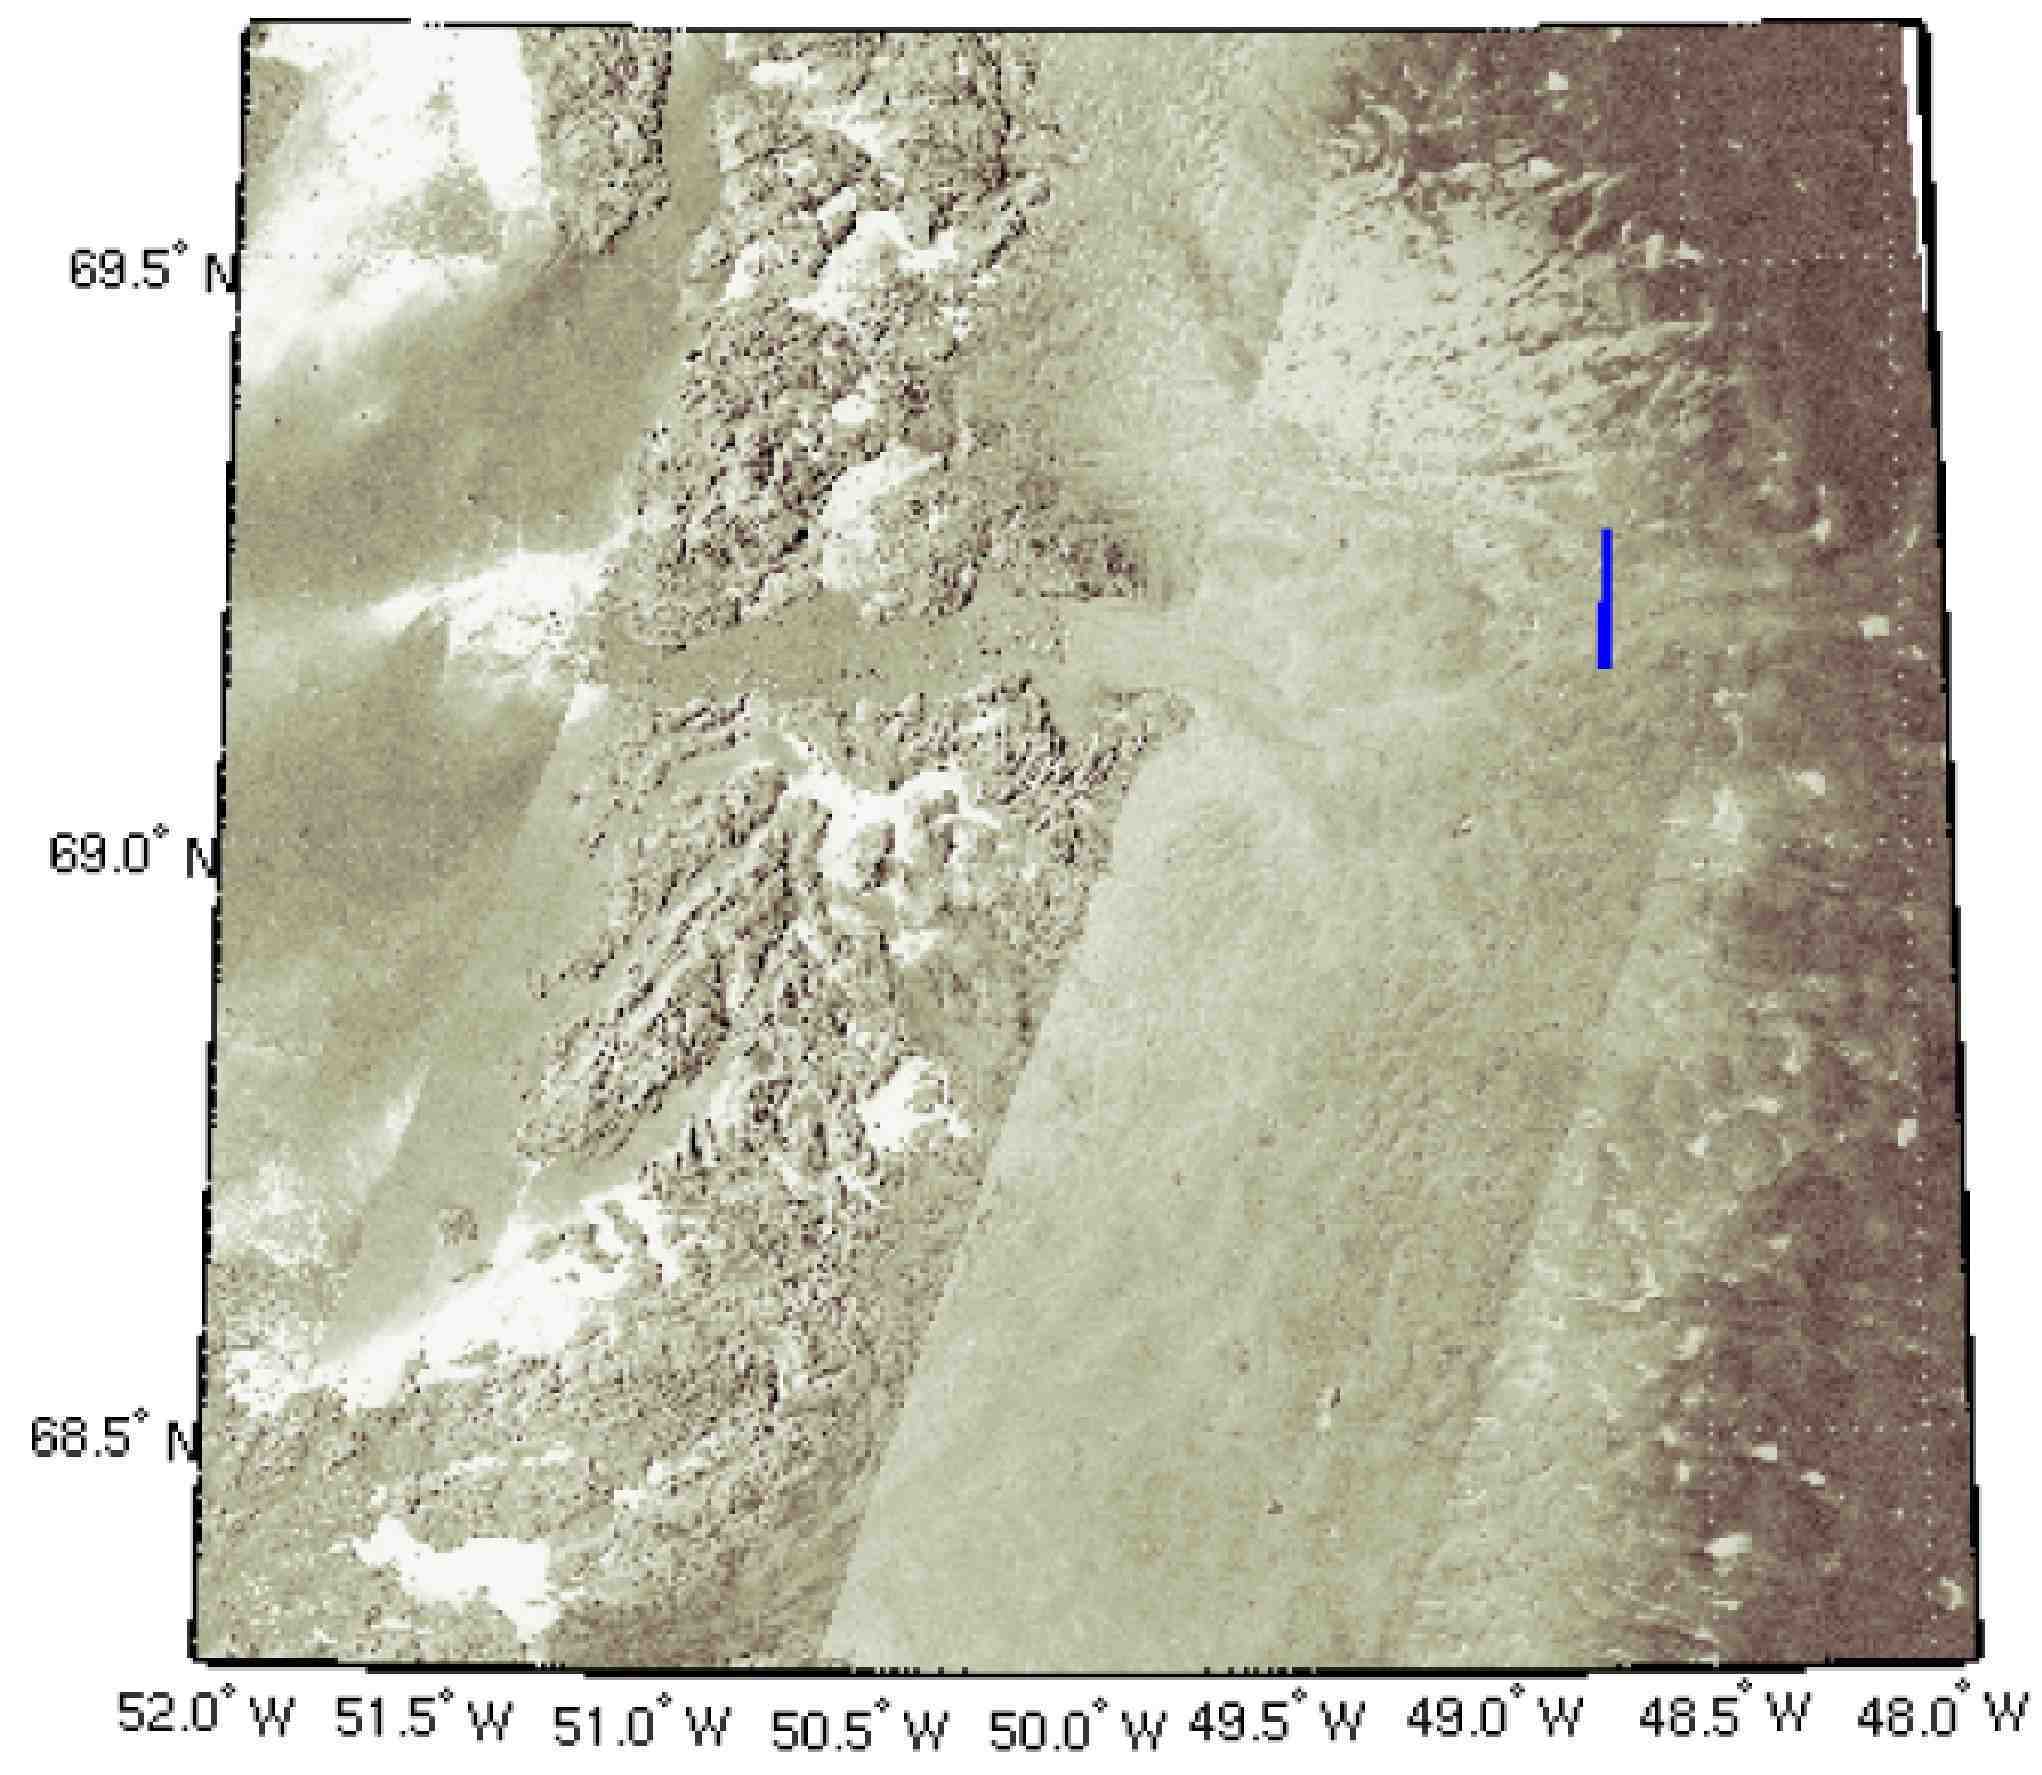 Image of map showing where in the Jakobshavn channel data was collected.